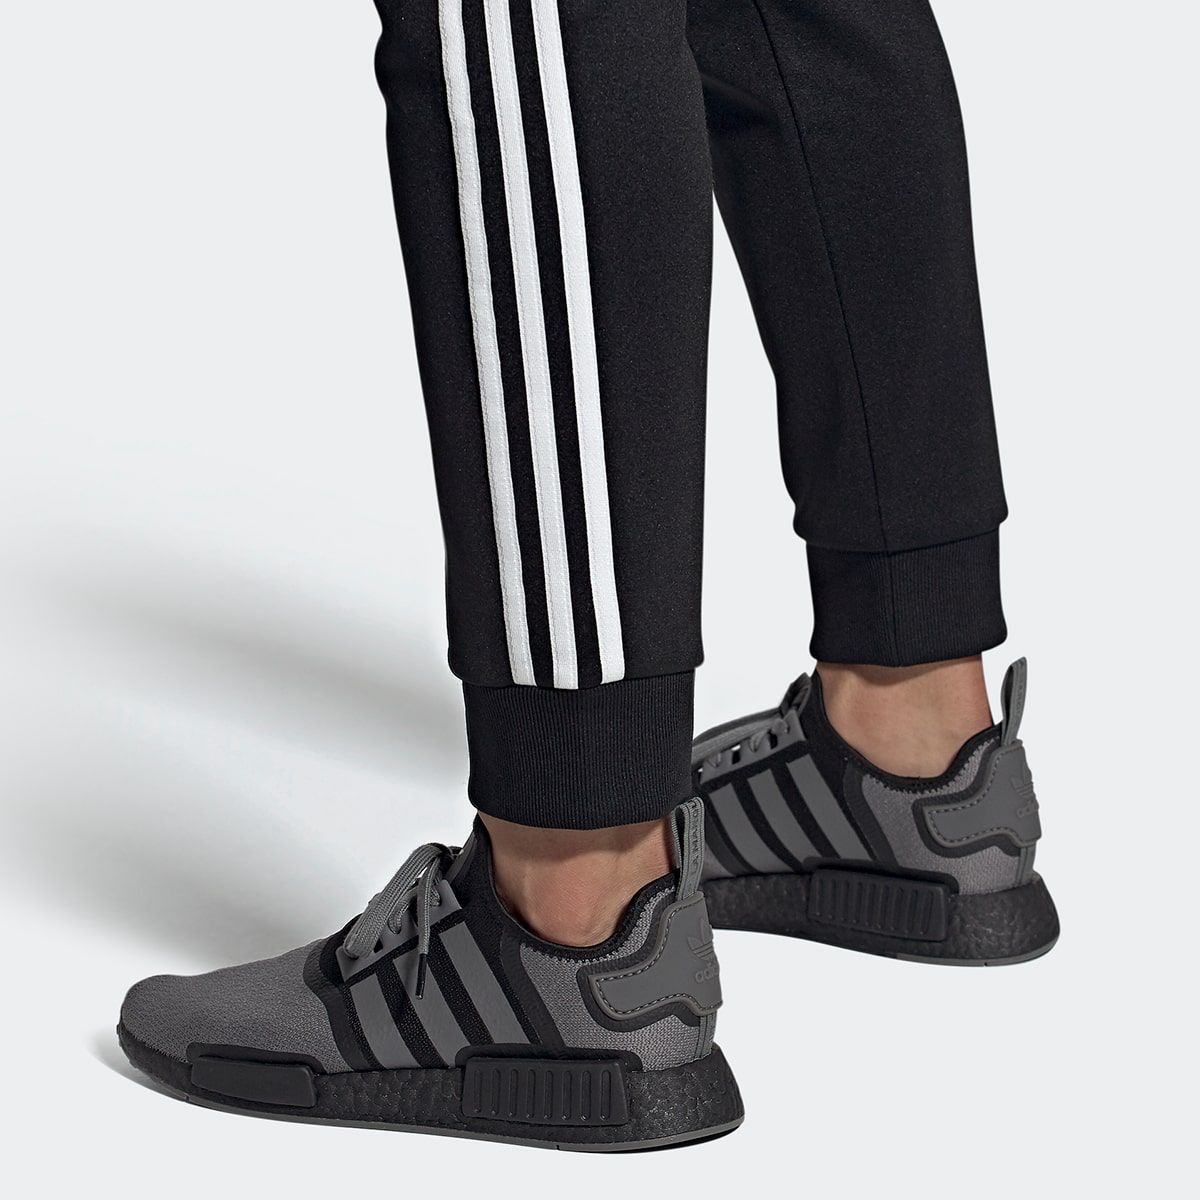 adidas NMD Available Now in Black and Grey | HOUSE OF HEAT